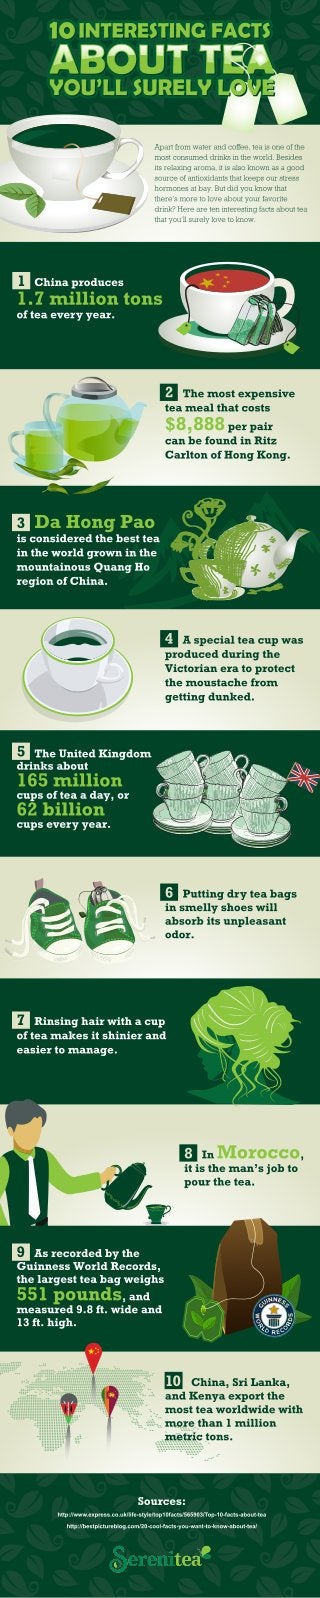 10 Interesting Facts about Tea You’ll Love to Know [Infographic]